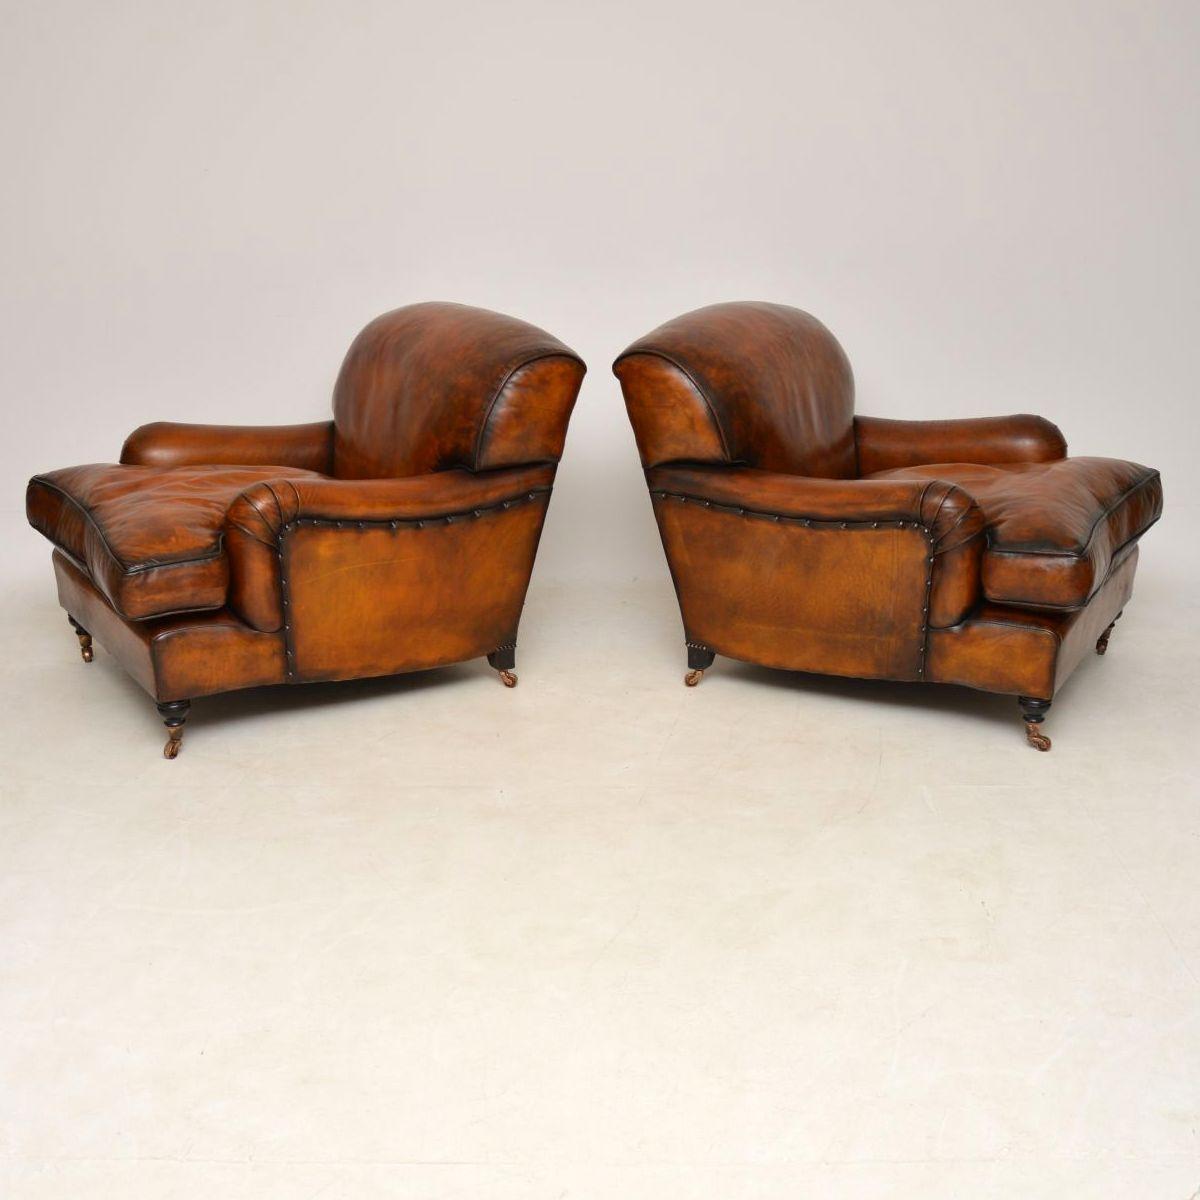 Victorian Large Pair of Leather Antique ‘Howard’ Style Armchairs